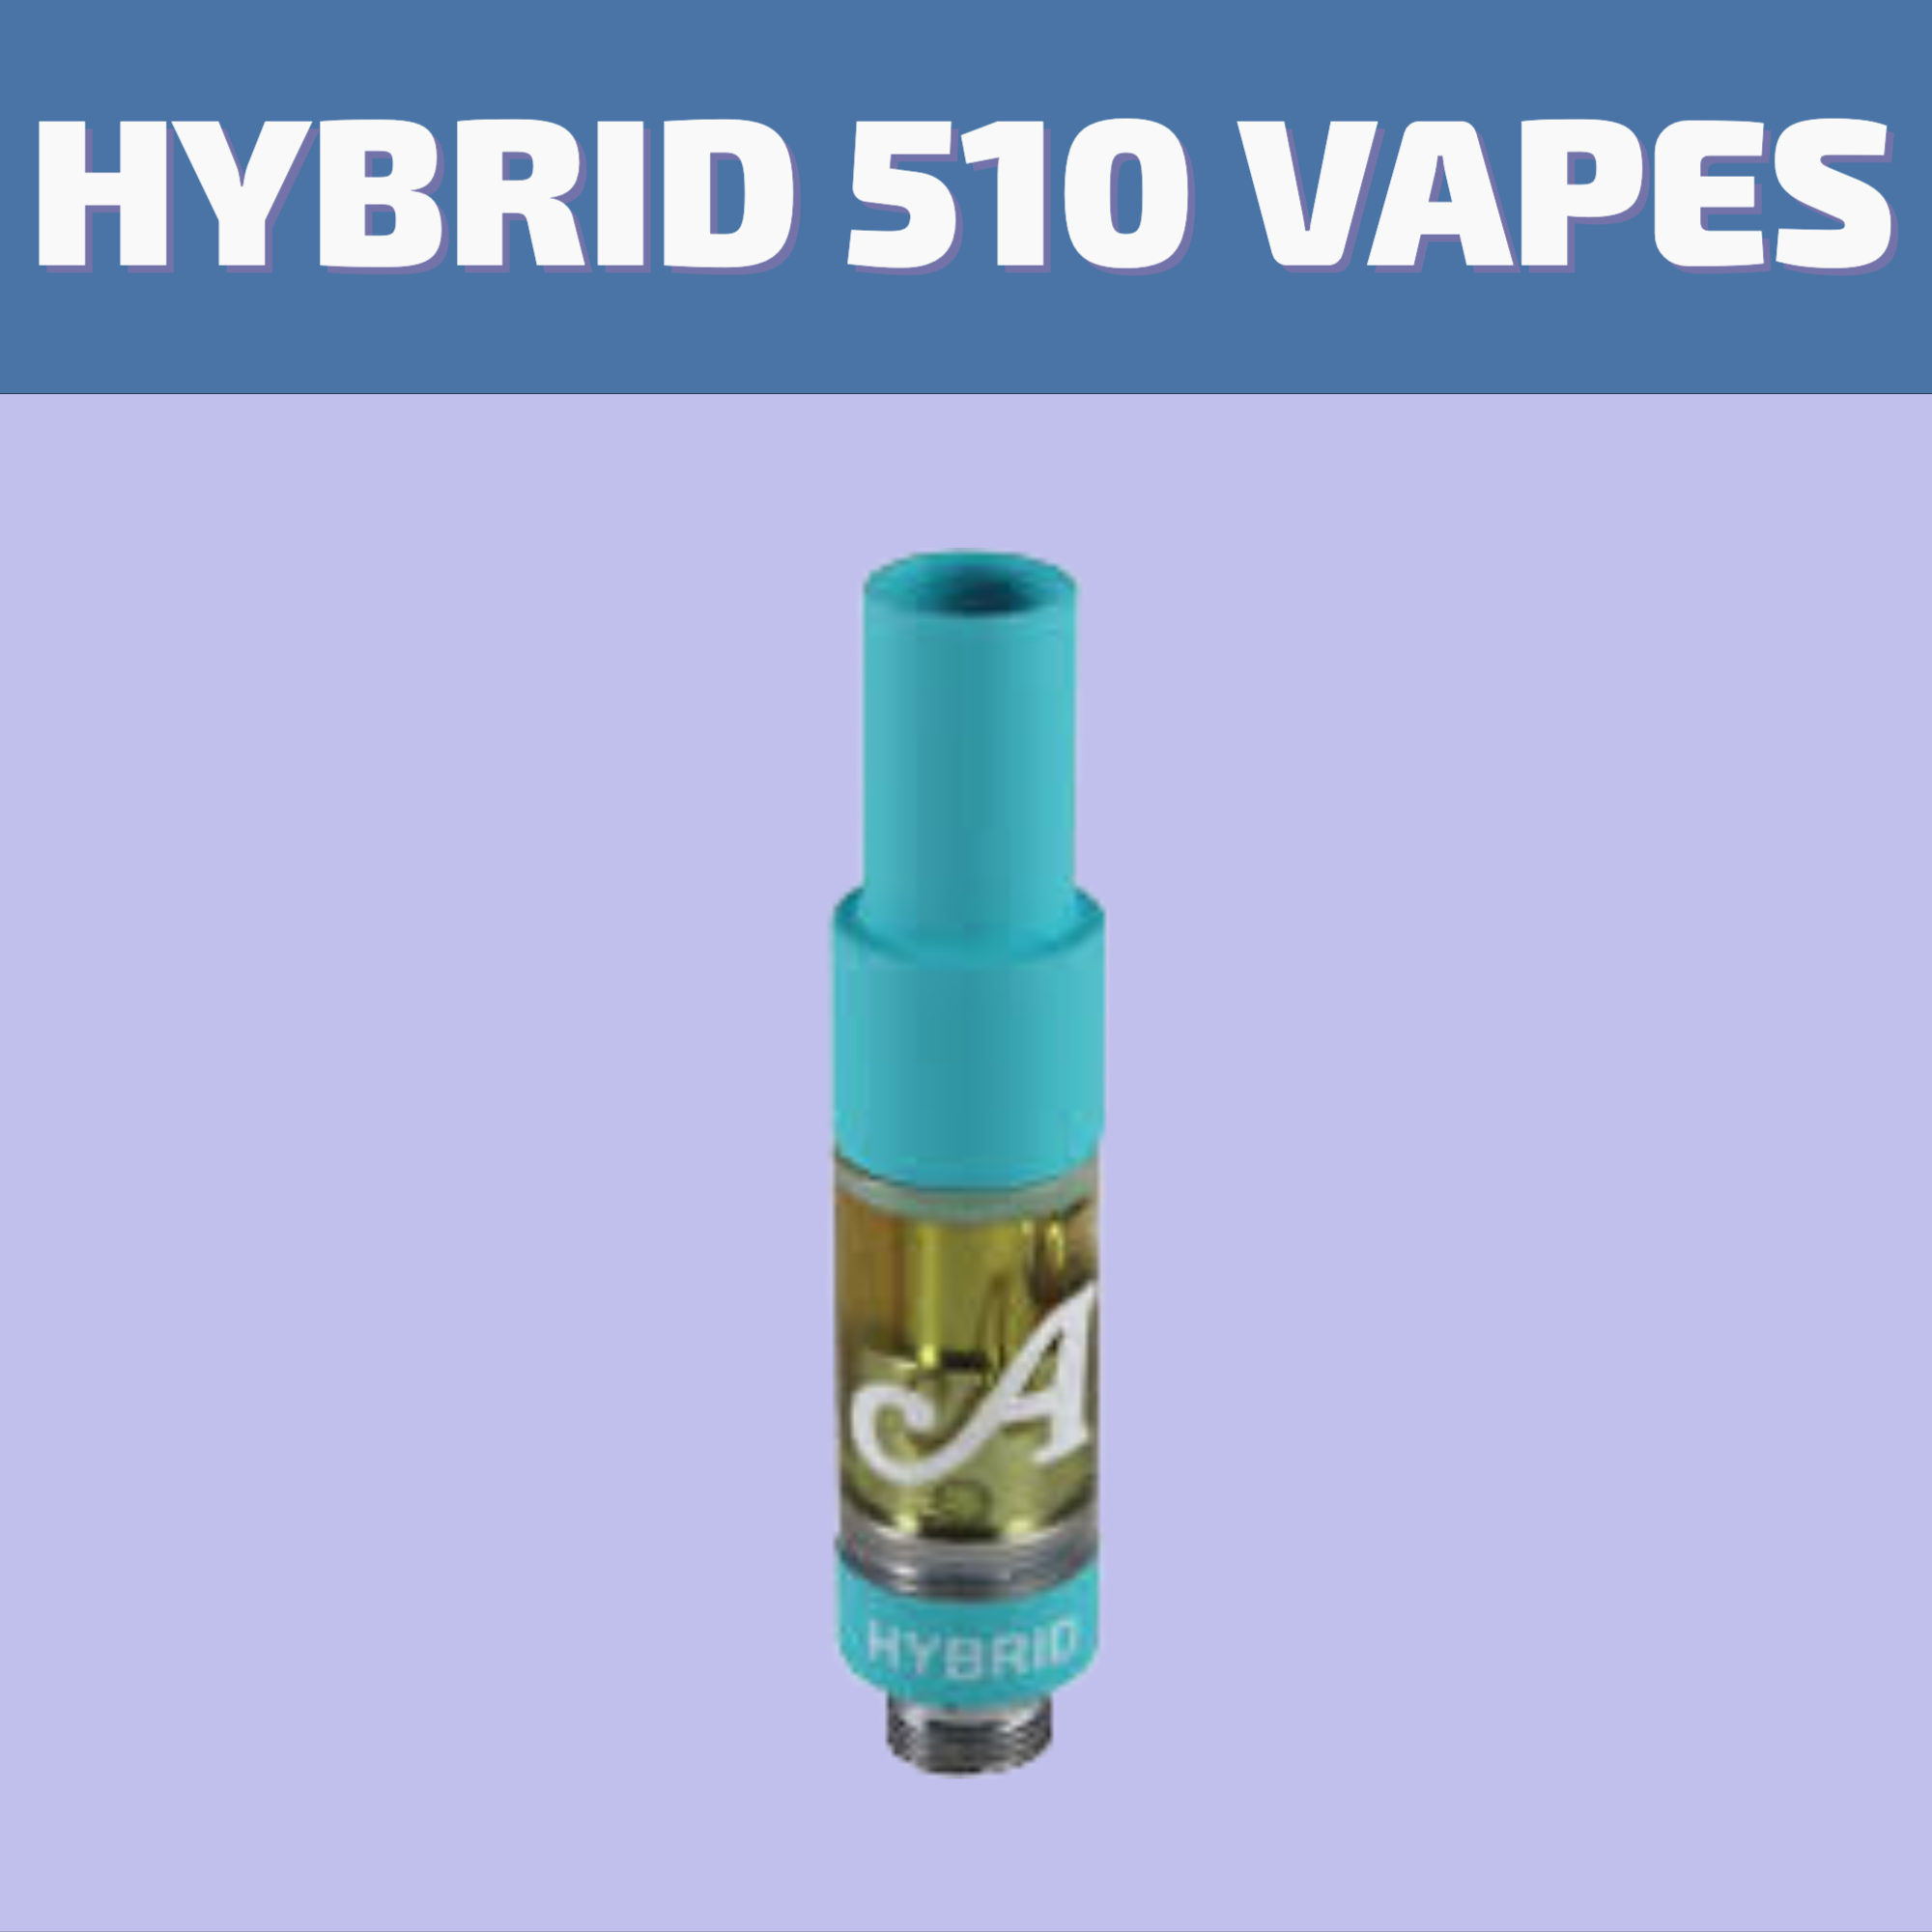 Order Hybrid 510 Vape Cartridges and 510 Vape Batteries online for same day delivery in Winnipeg or visit our cannabis store on 580 Academy Road. 